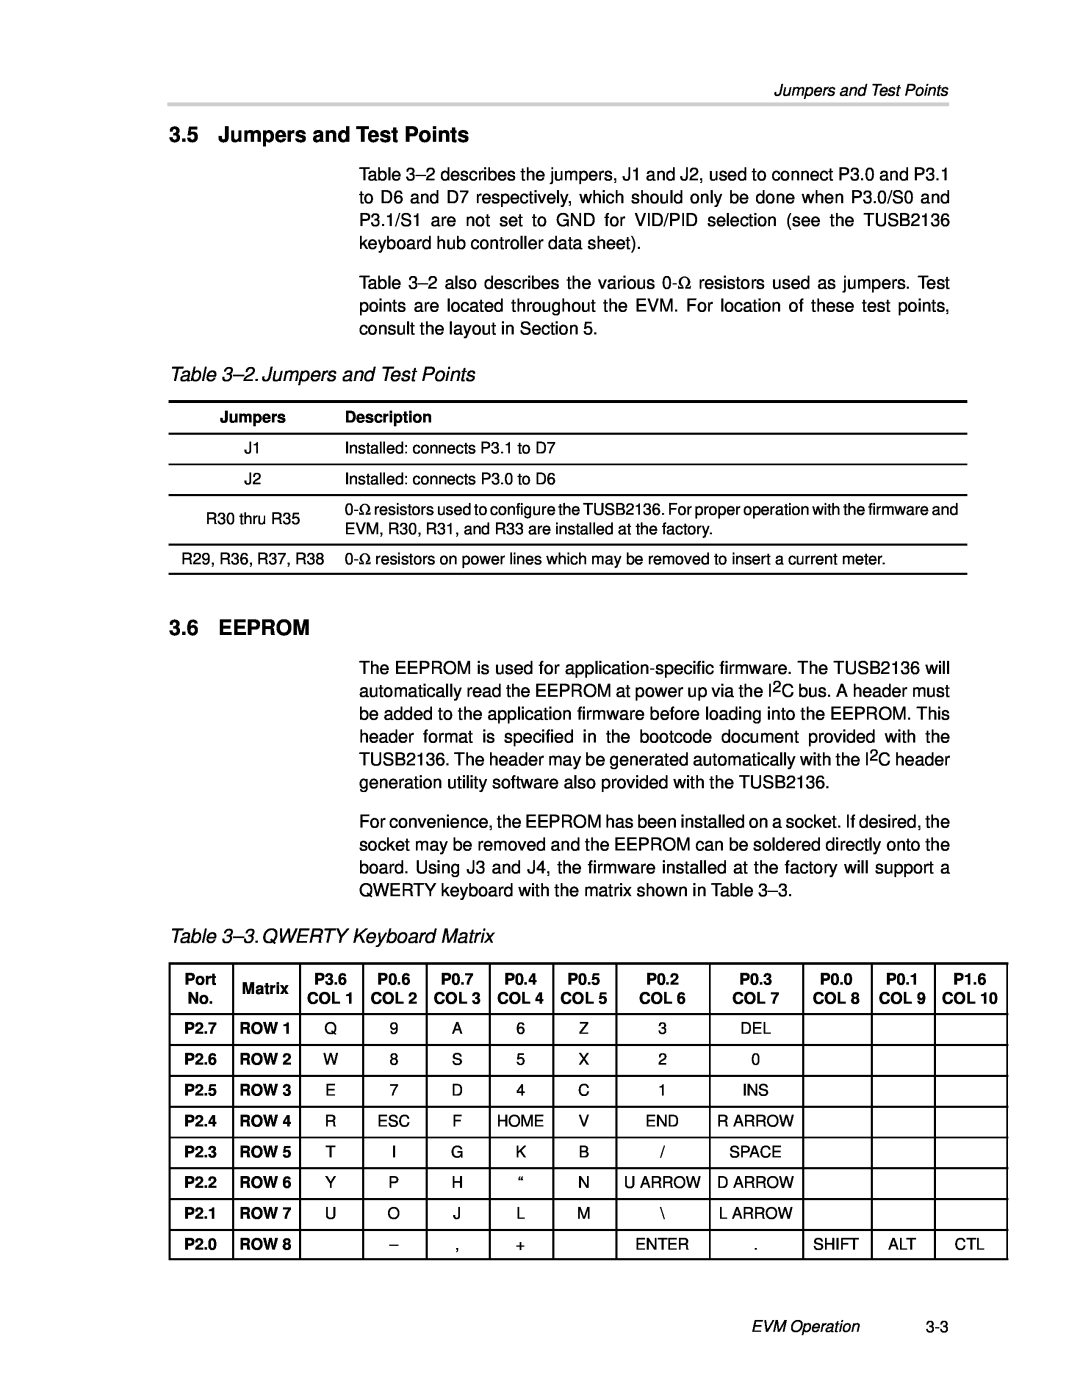 Texas Instruments TPS2149 manual 2. Jumpers and Test Points, Eeprom, 3. QWERTY Keyboard Matrix 